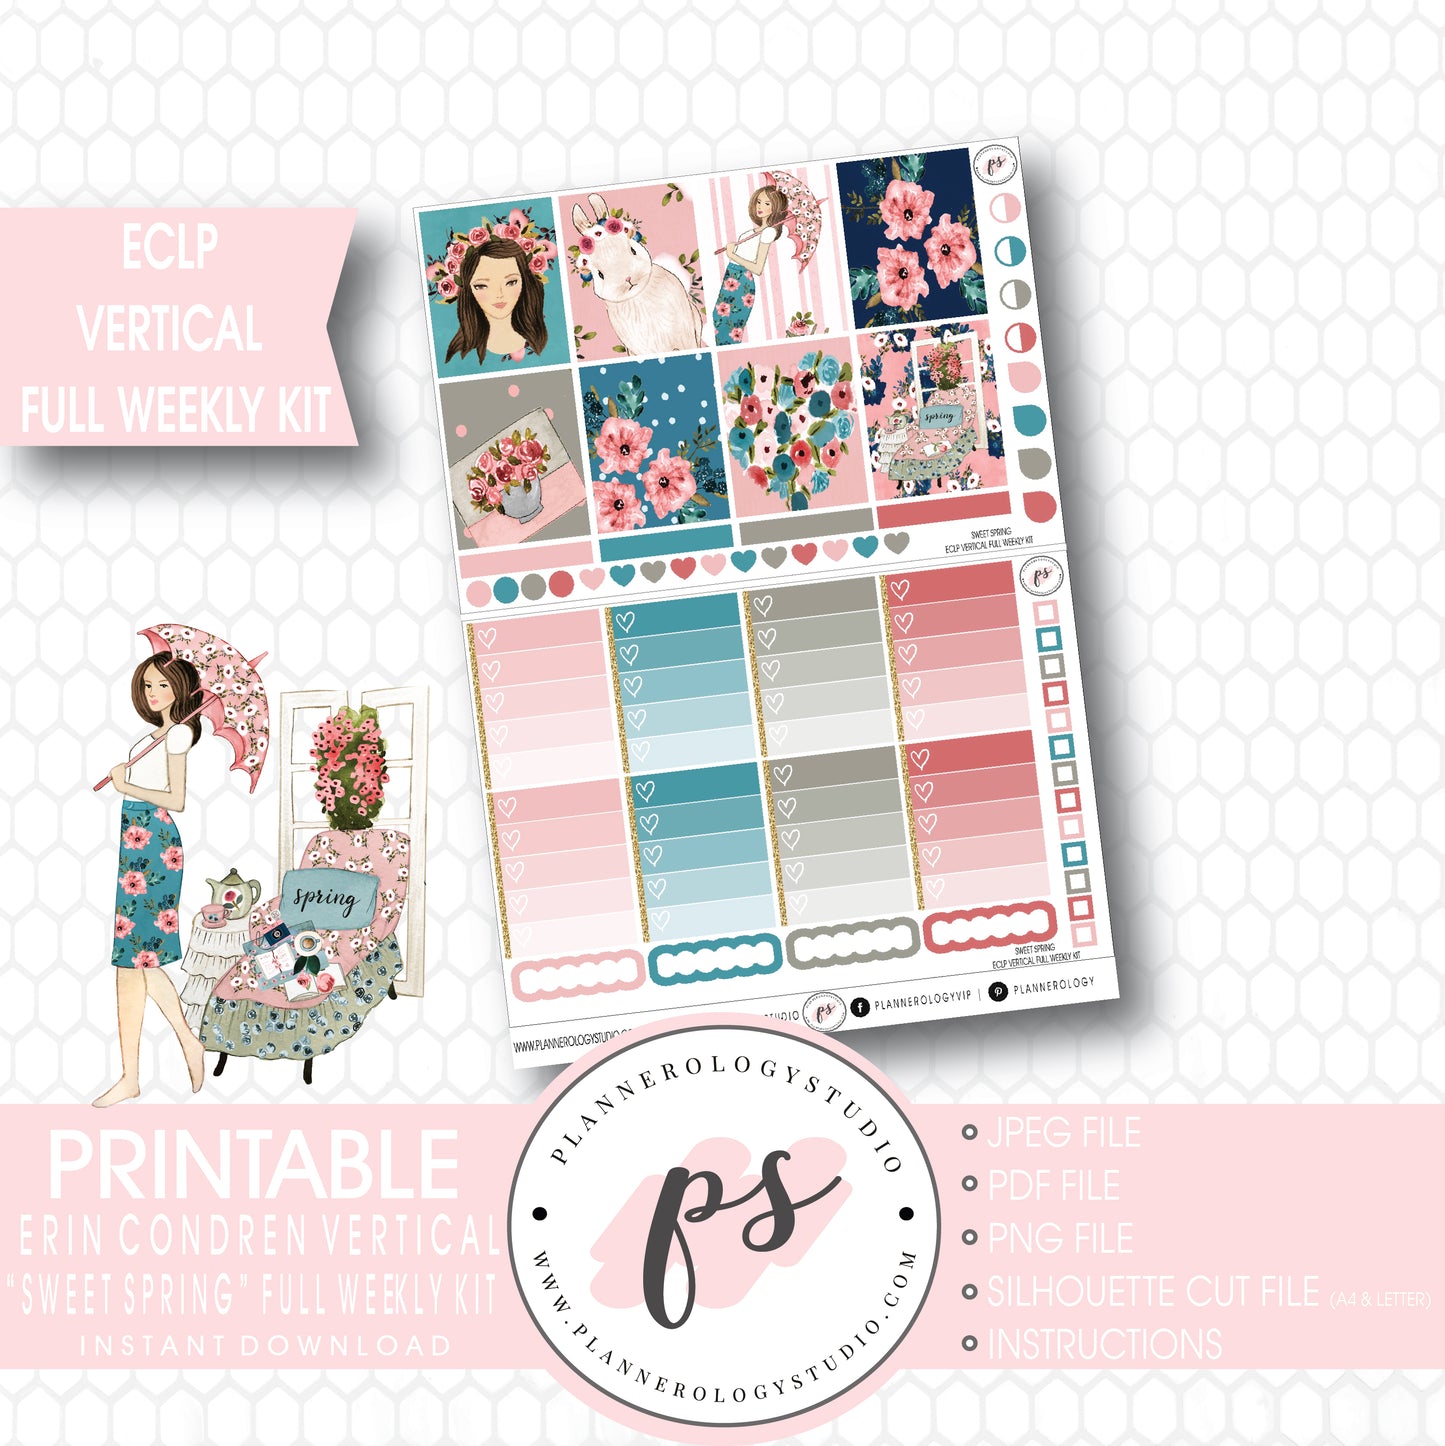 Sweet Spring Full Weekly Kit Printable Planner Stickers (for use with ECLP Vertical) - Plannerologystudio